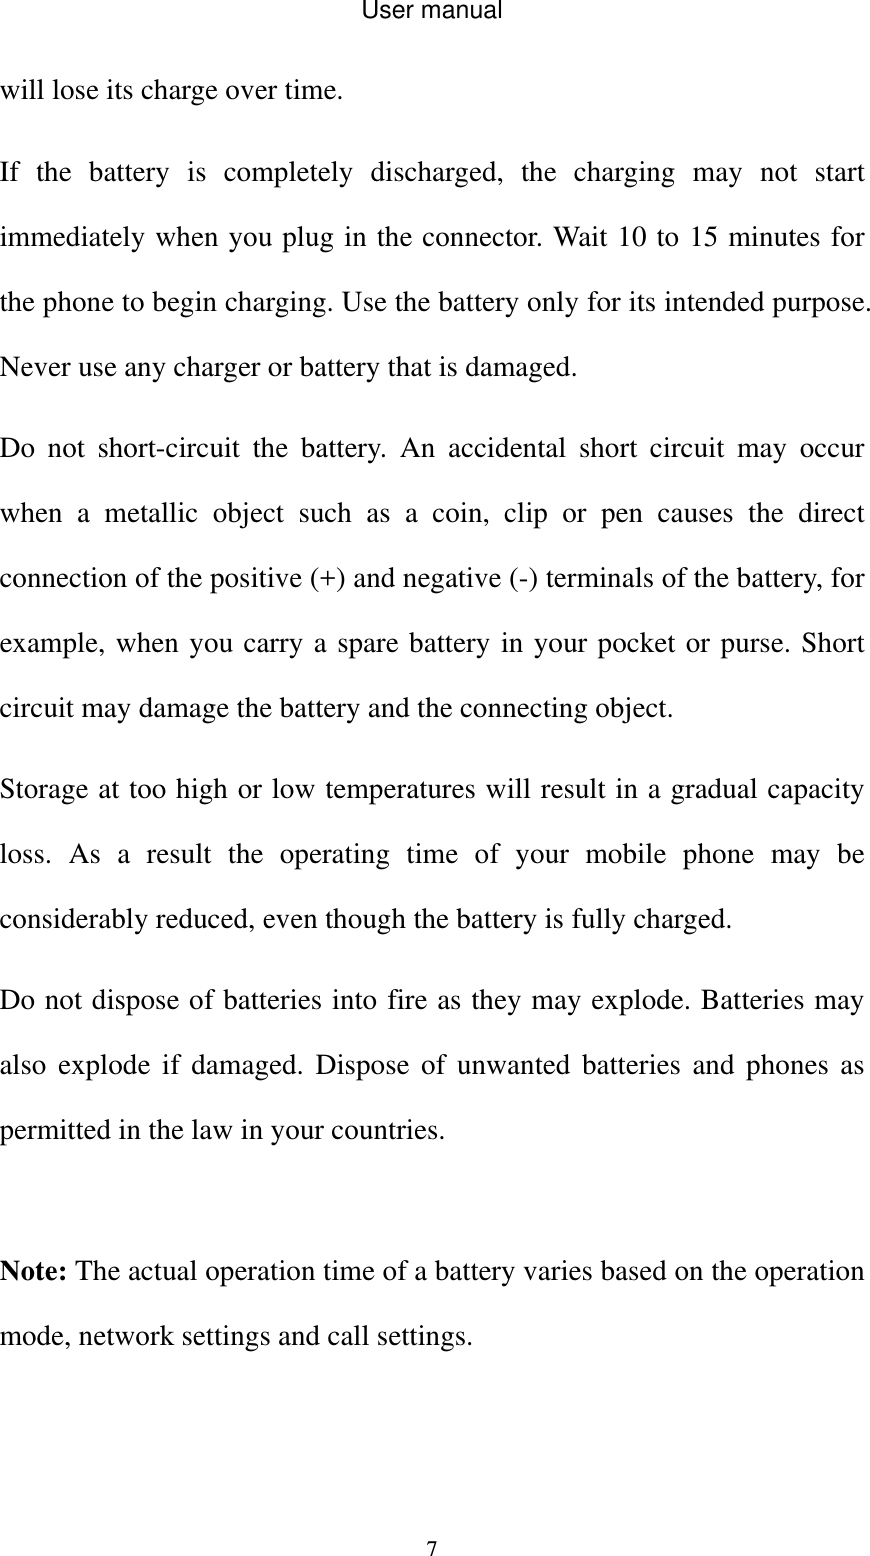 User manual  7will lose its charge over time. If the battery is completely discharged, the charging may not start immediately when you plug in the connector. Wait 10 to 15 minutes for the phone to begin charging. Use the battery only for its intended purpose. Never use any charger or battery that is damaged. Do not short-circuit the battery. An accidental short circuit may occur when a metallic object such as a coin, clip or pen causes the direct connection of the positive (+) and negative (-) terminals of the battery, for example, when you carry a spare battery in your pocket or purse. Short circuit may damage the battery and the connecting object. Storage at too high or low temperatures will result in a gradual capacity loss. As a result the operating time of your mobile phone may be considerably reduced, even though the battery is fully charged. Do not dispose of batteries into fire as they may explode. Batteries may also explode if damaged. Dispose of unwanted batteries and phones as permitted in the law in your countries.  Note: The actual operation time of a battery varies based on the operation mode, network settings and call settings.  